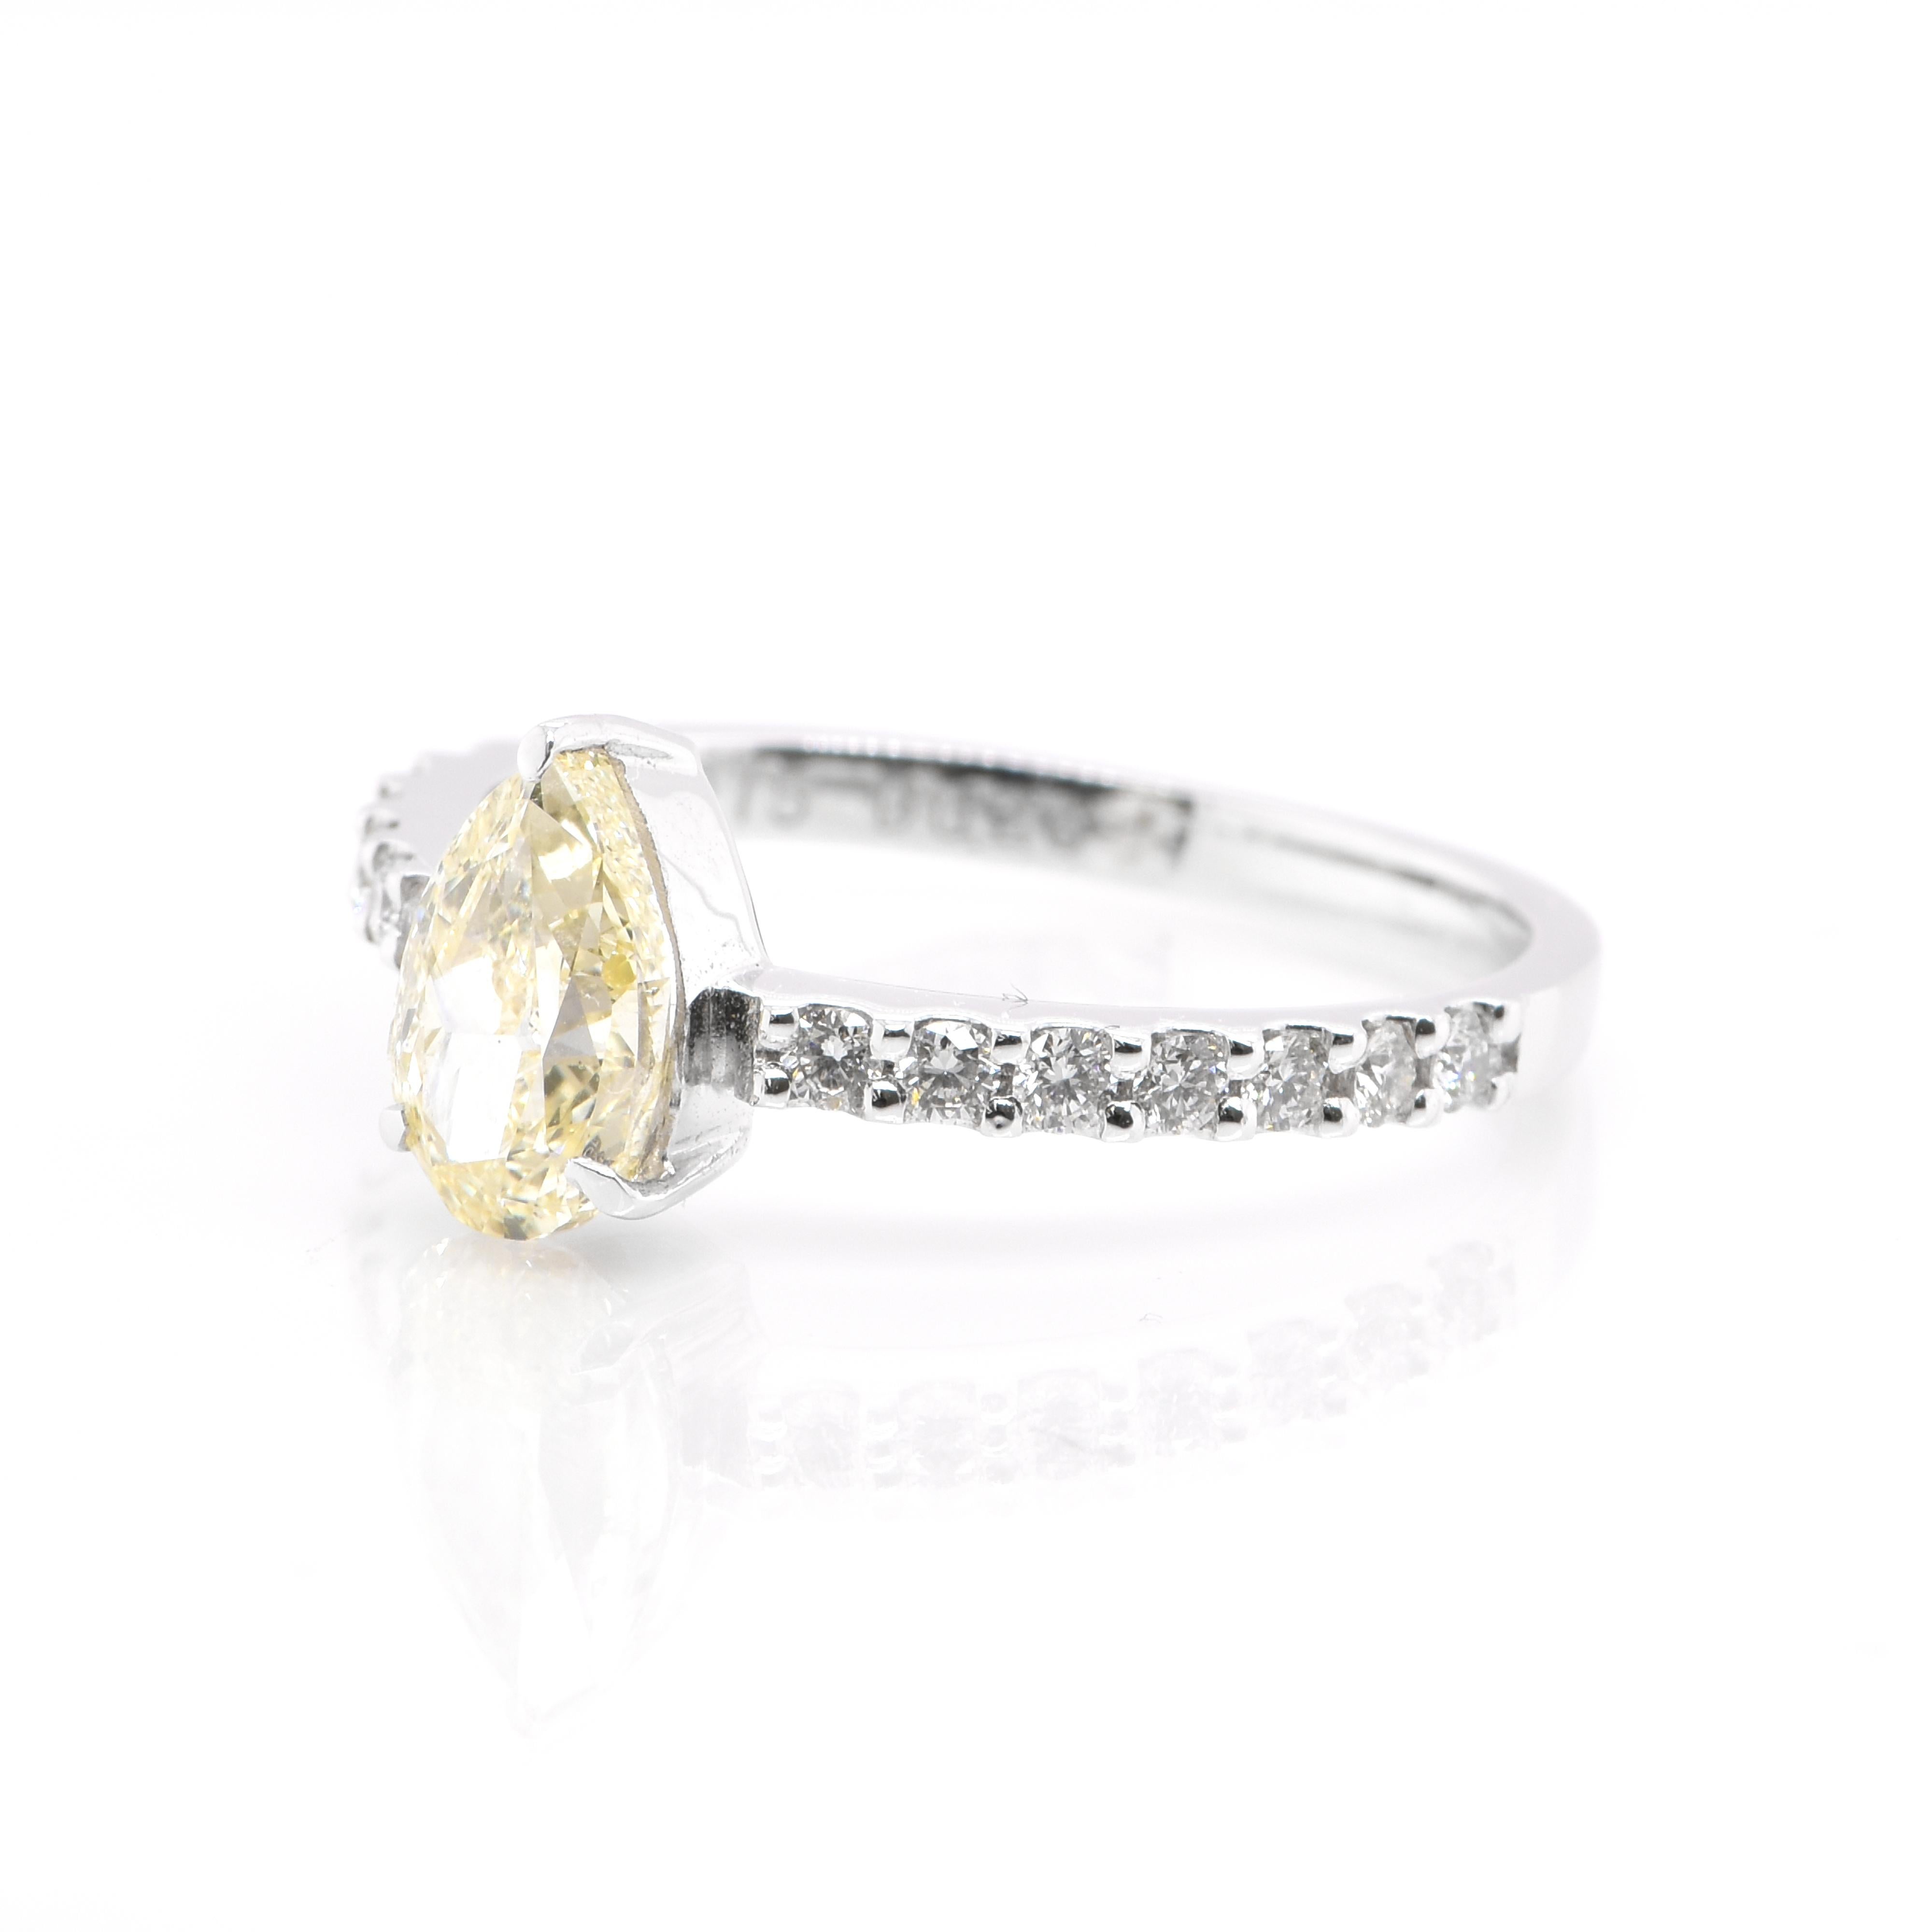 An elegant Chuo Gem Laboratory (Japan) Certified 1.01 Carat, Natural, Pear-Shape, Light Yellow, SI-1 Diamond in Solitaire Setting accompanied by 0.26 Carats of White Round Brilliant Diamond Accents. Set in Platinum. Diamonds have been adorned and